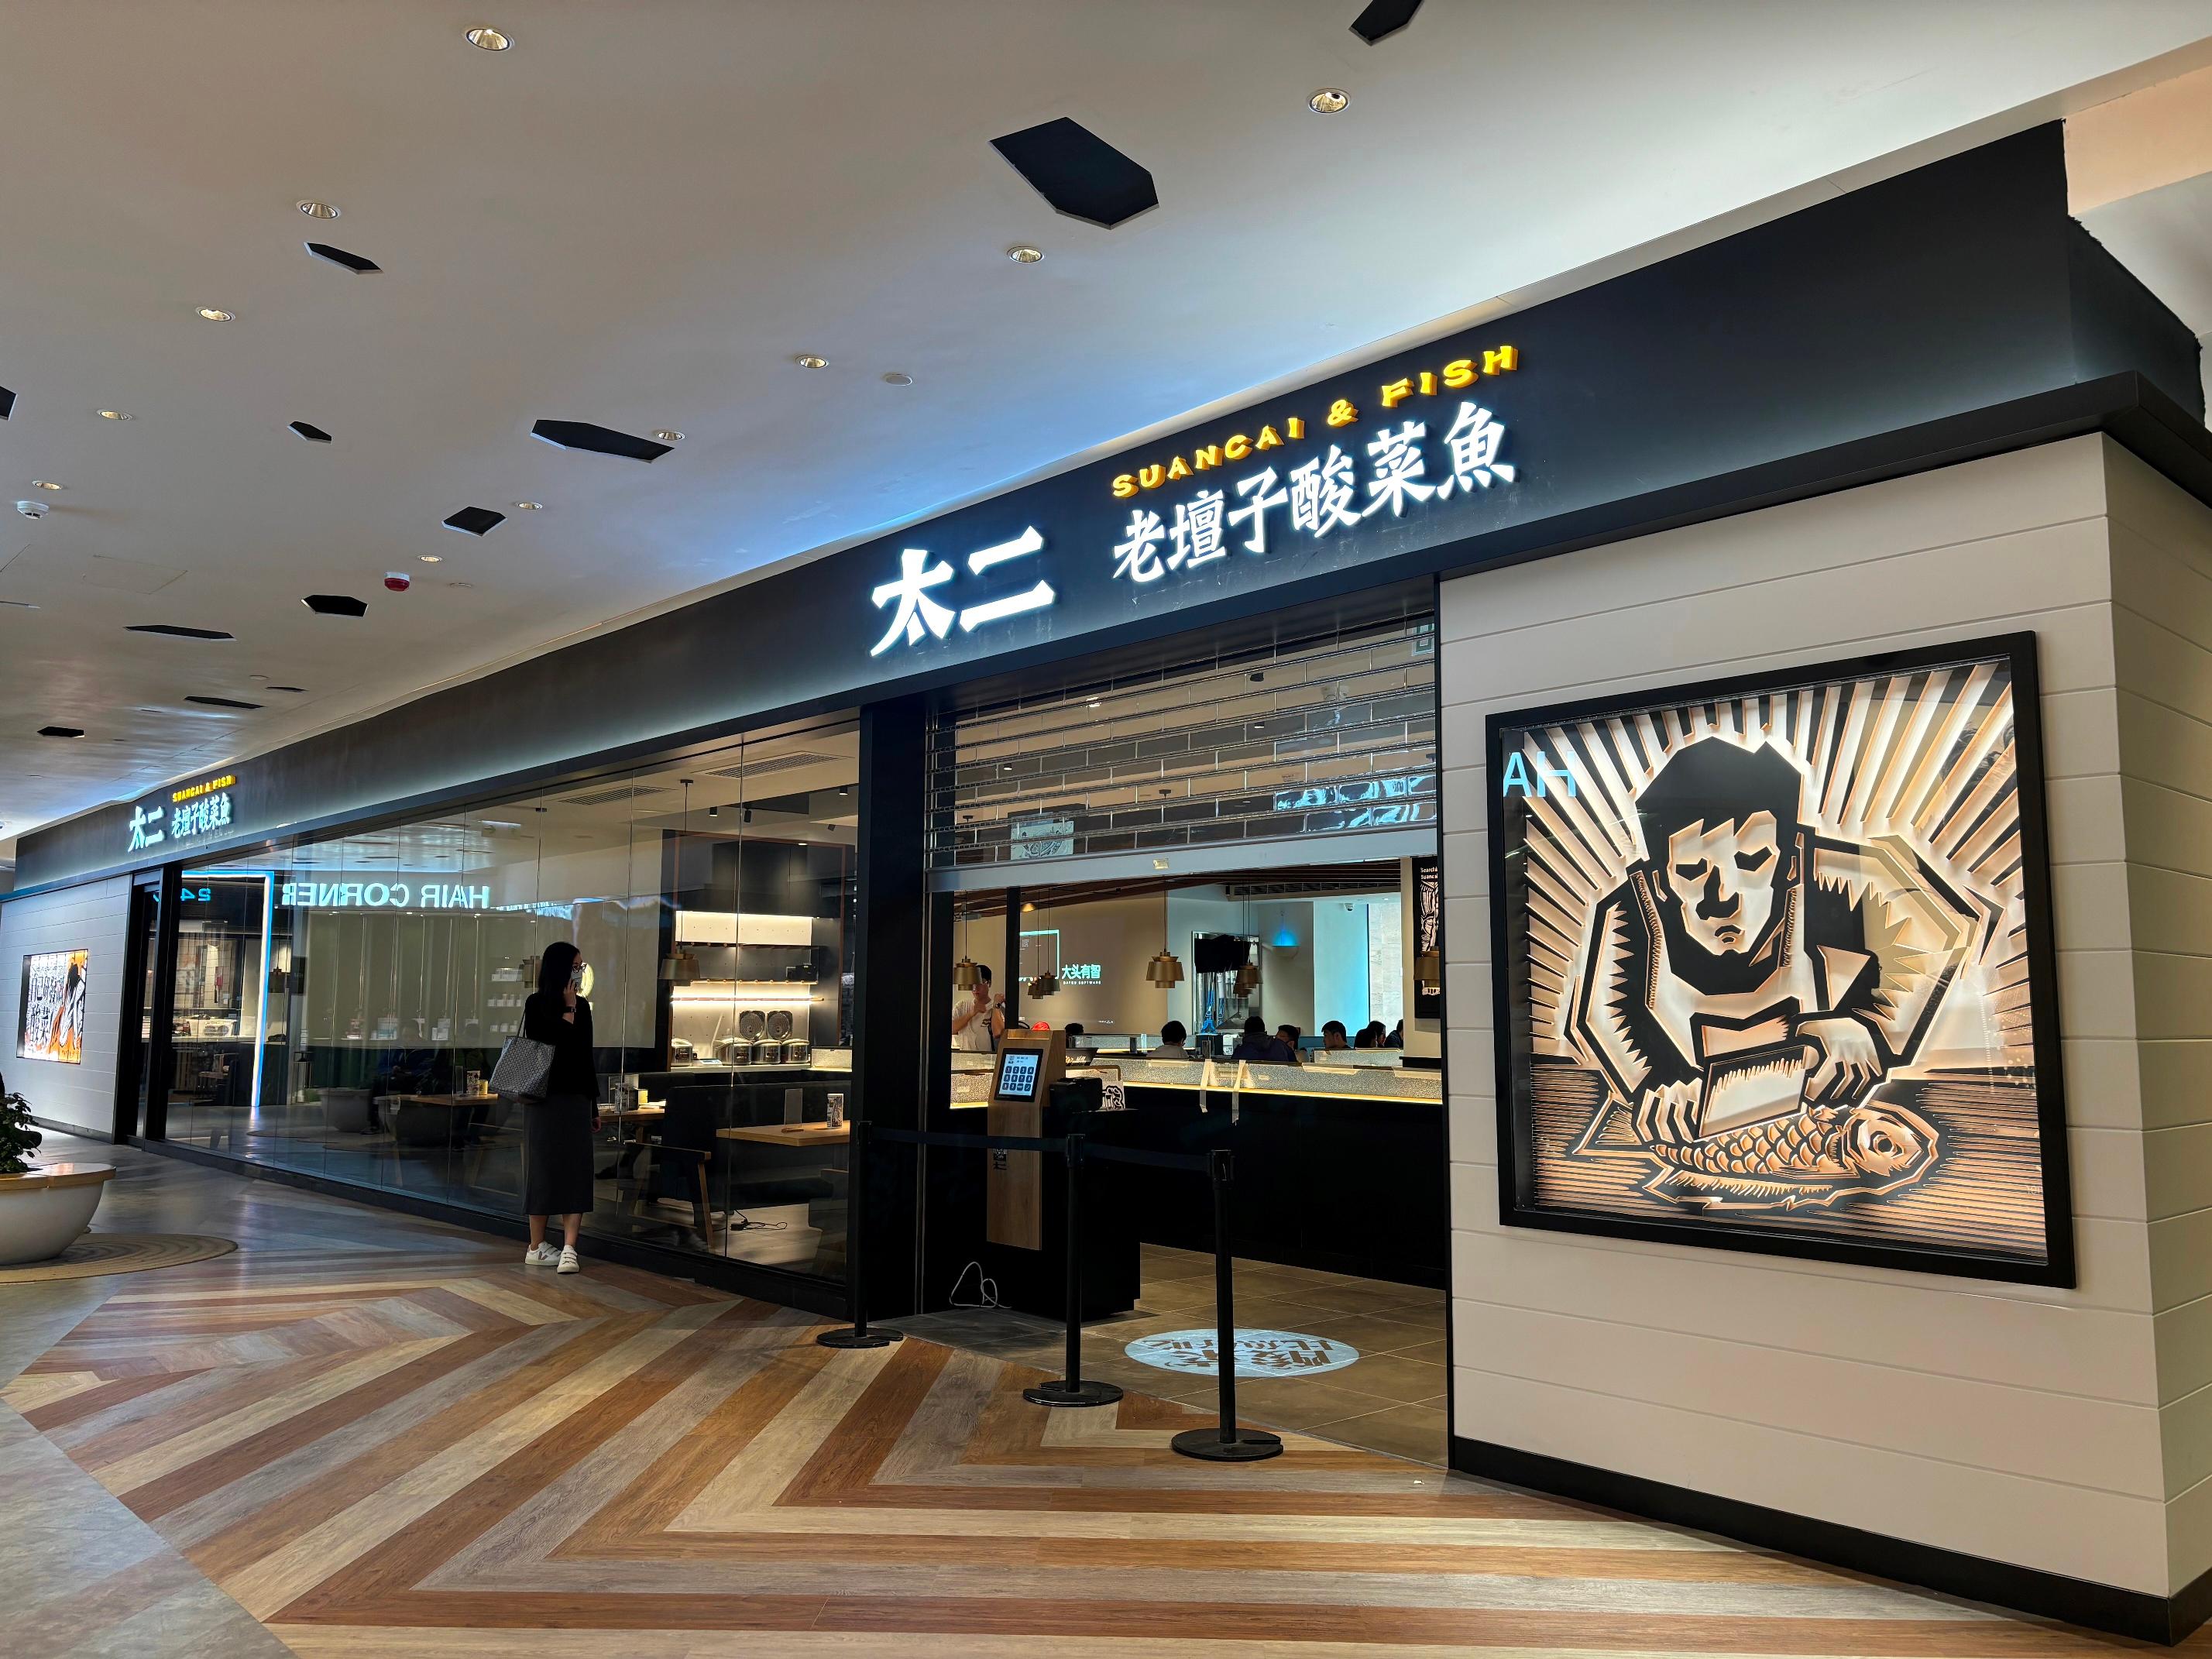 Invest Hong Kong announced today (December 11) that one of its assisted companies, Mainland restaurant brand Tai Er, is opening four suancai fish shops this month in a single investment showing ample confidence in the city's food and beverage industry. Photo shows one of its shops in Tsim Sha Tsui. 

